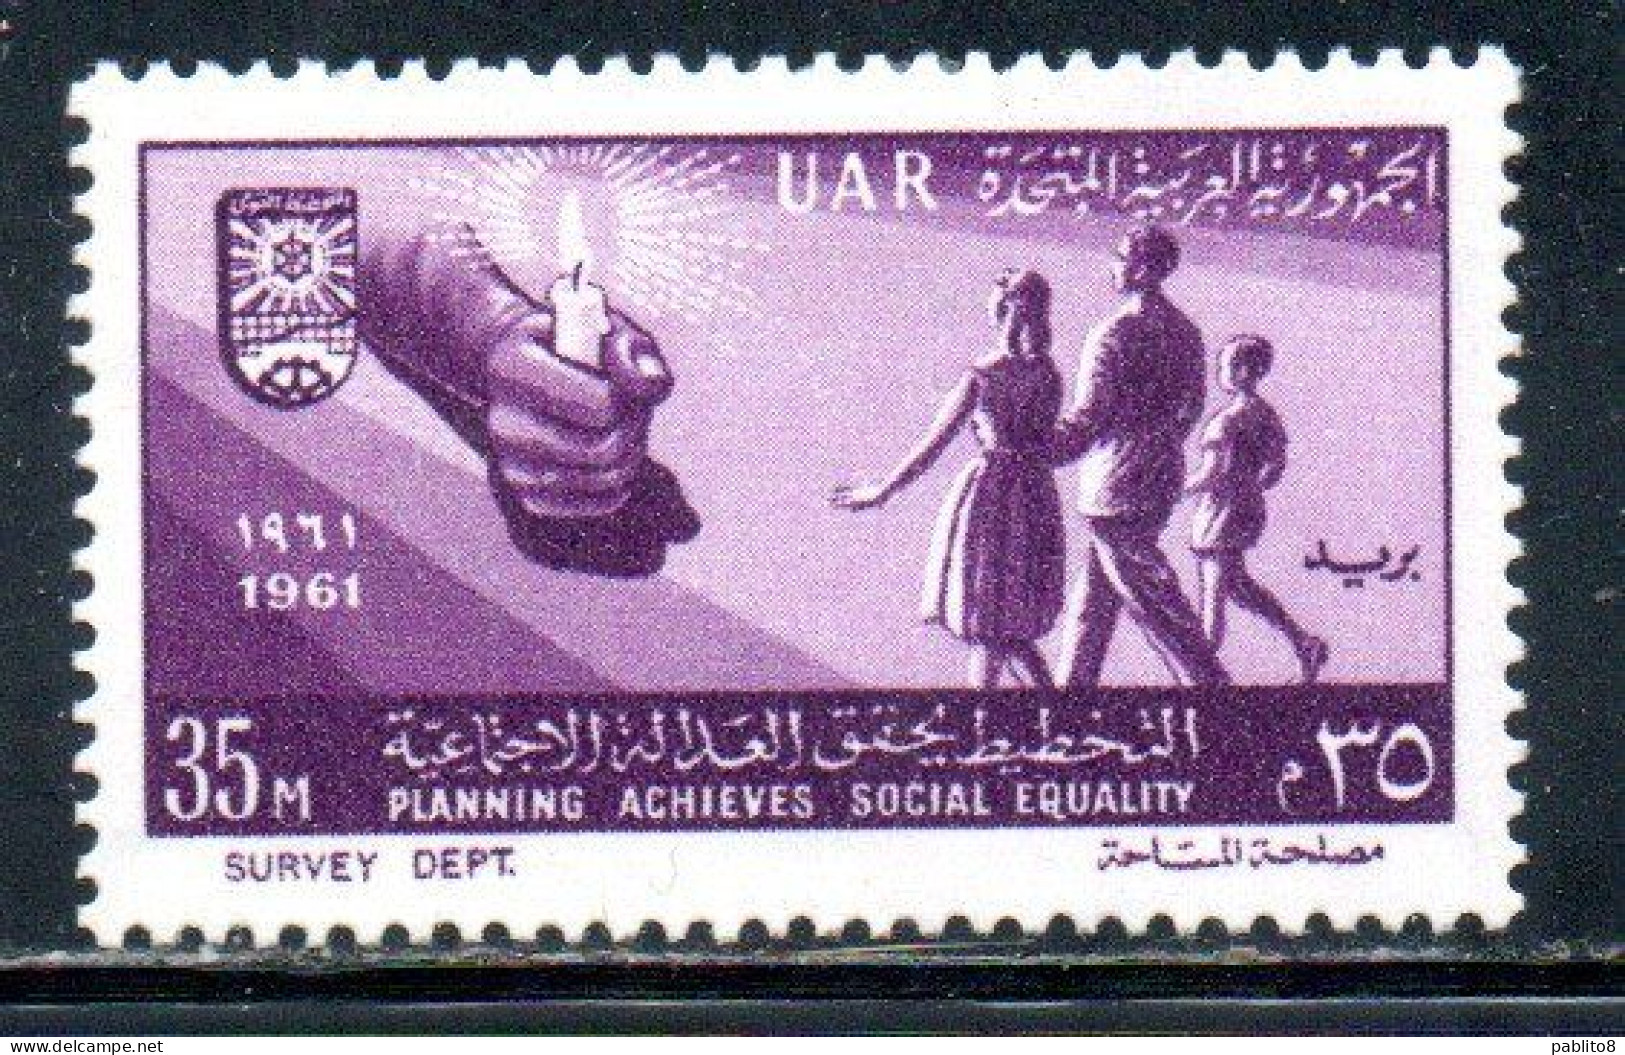 UAR EGYPT EGITTO 1961 PLANNING ACHIEVES SOCIAL EQUALITY HAND HOLDING CANDLE AND FAMILY 35m MH - Nuevos